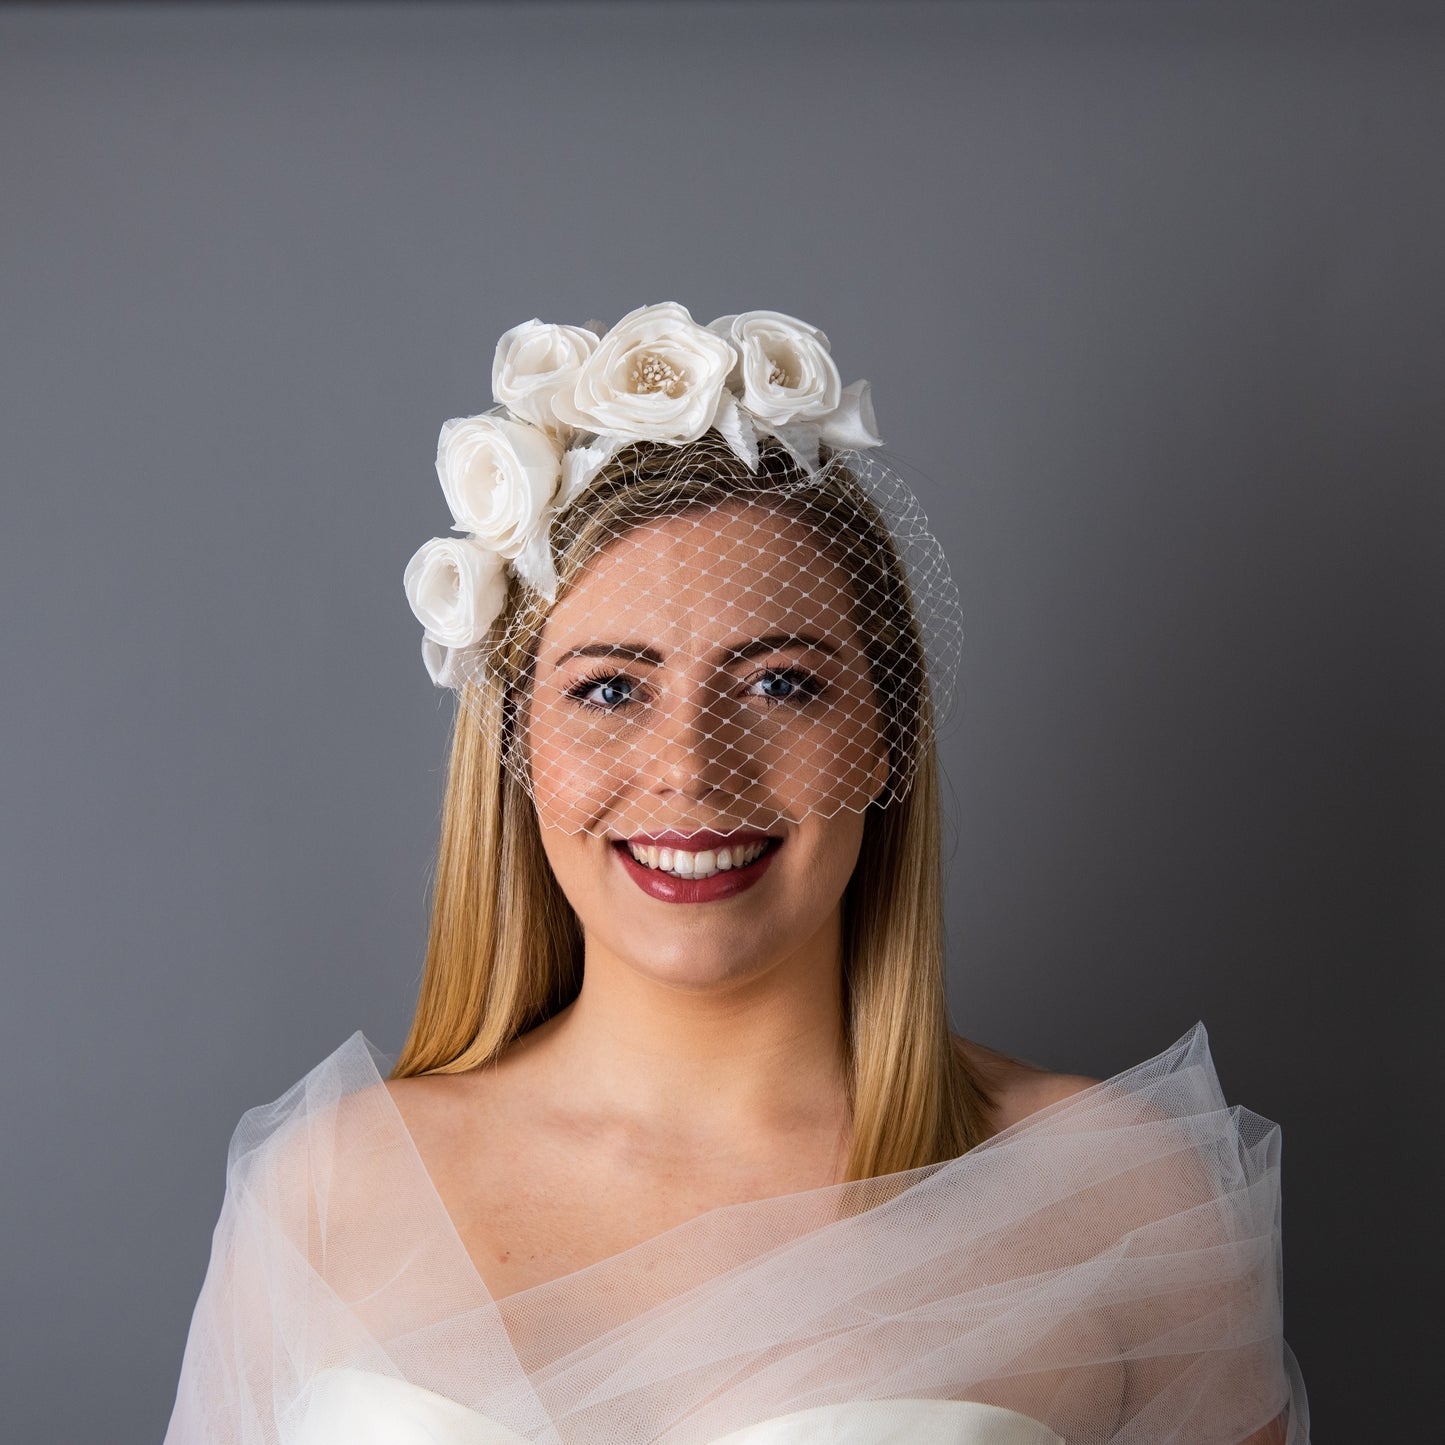 Happily Ever After Bridal birdcage veil with silk flowers on headband